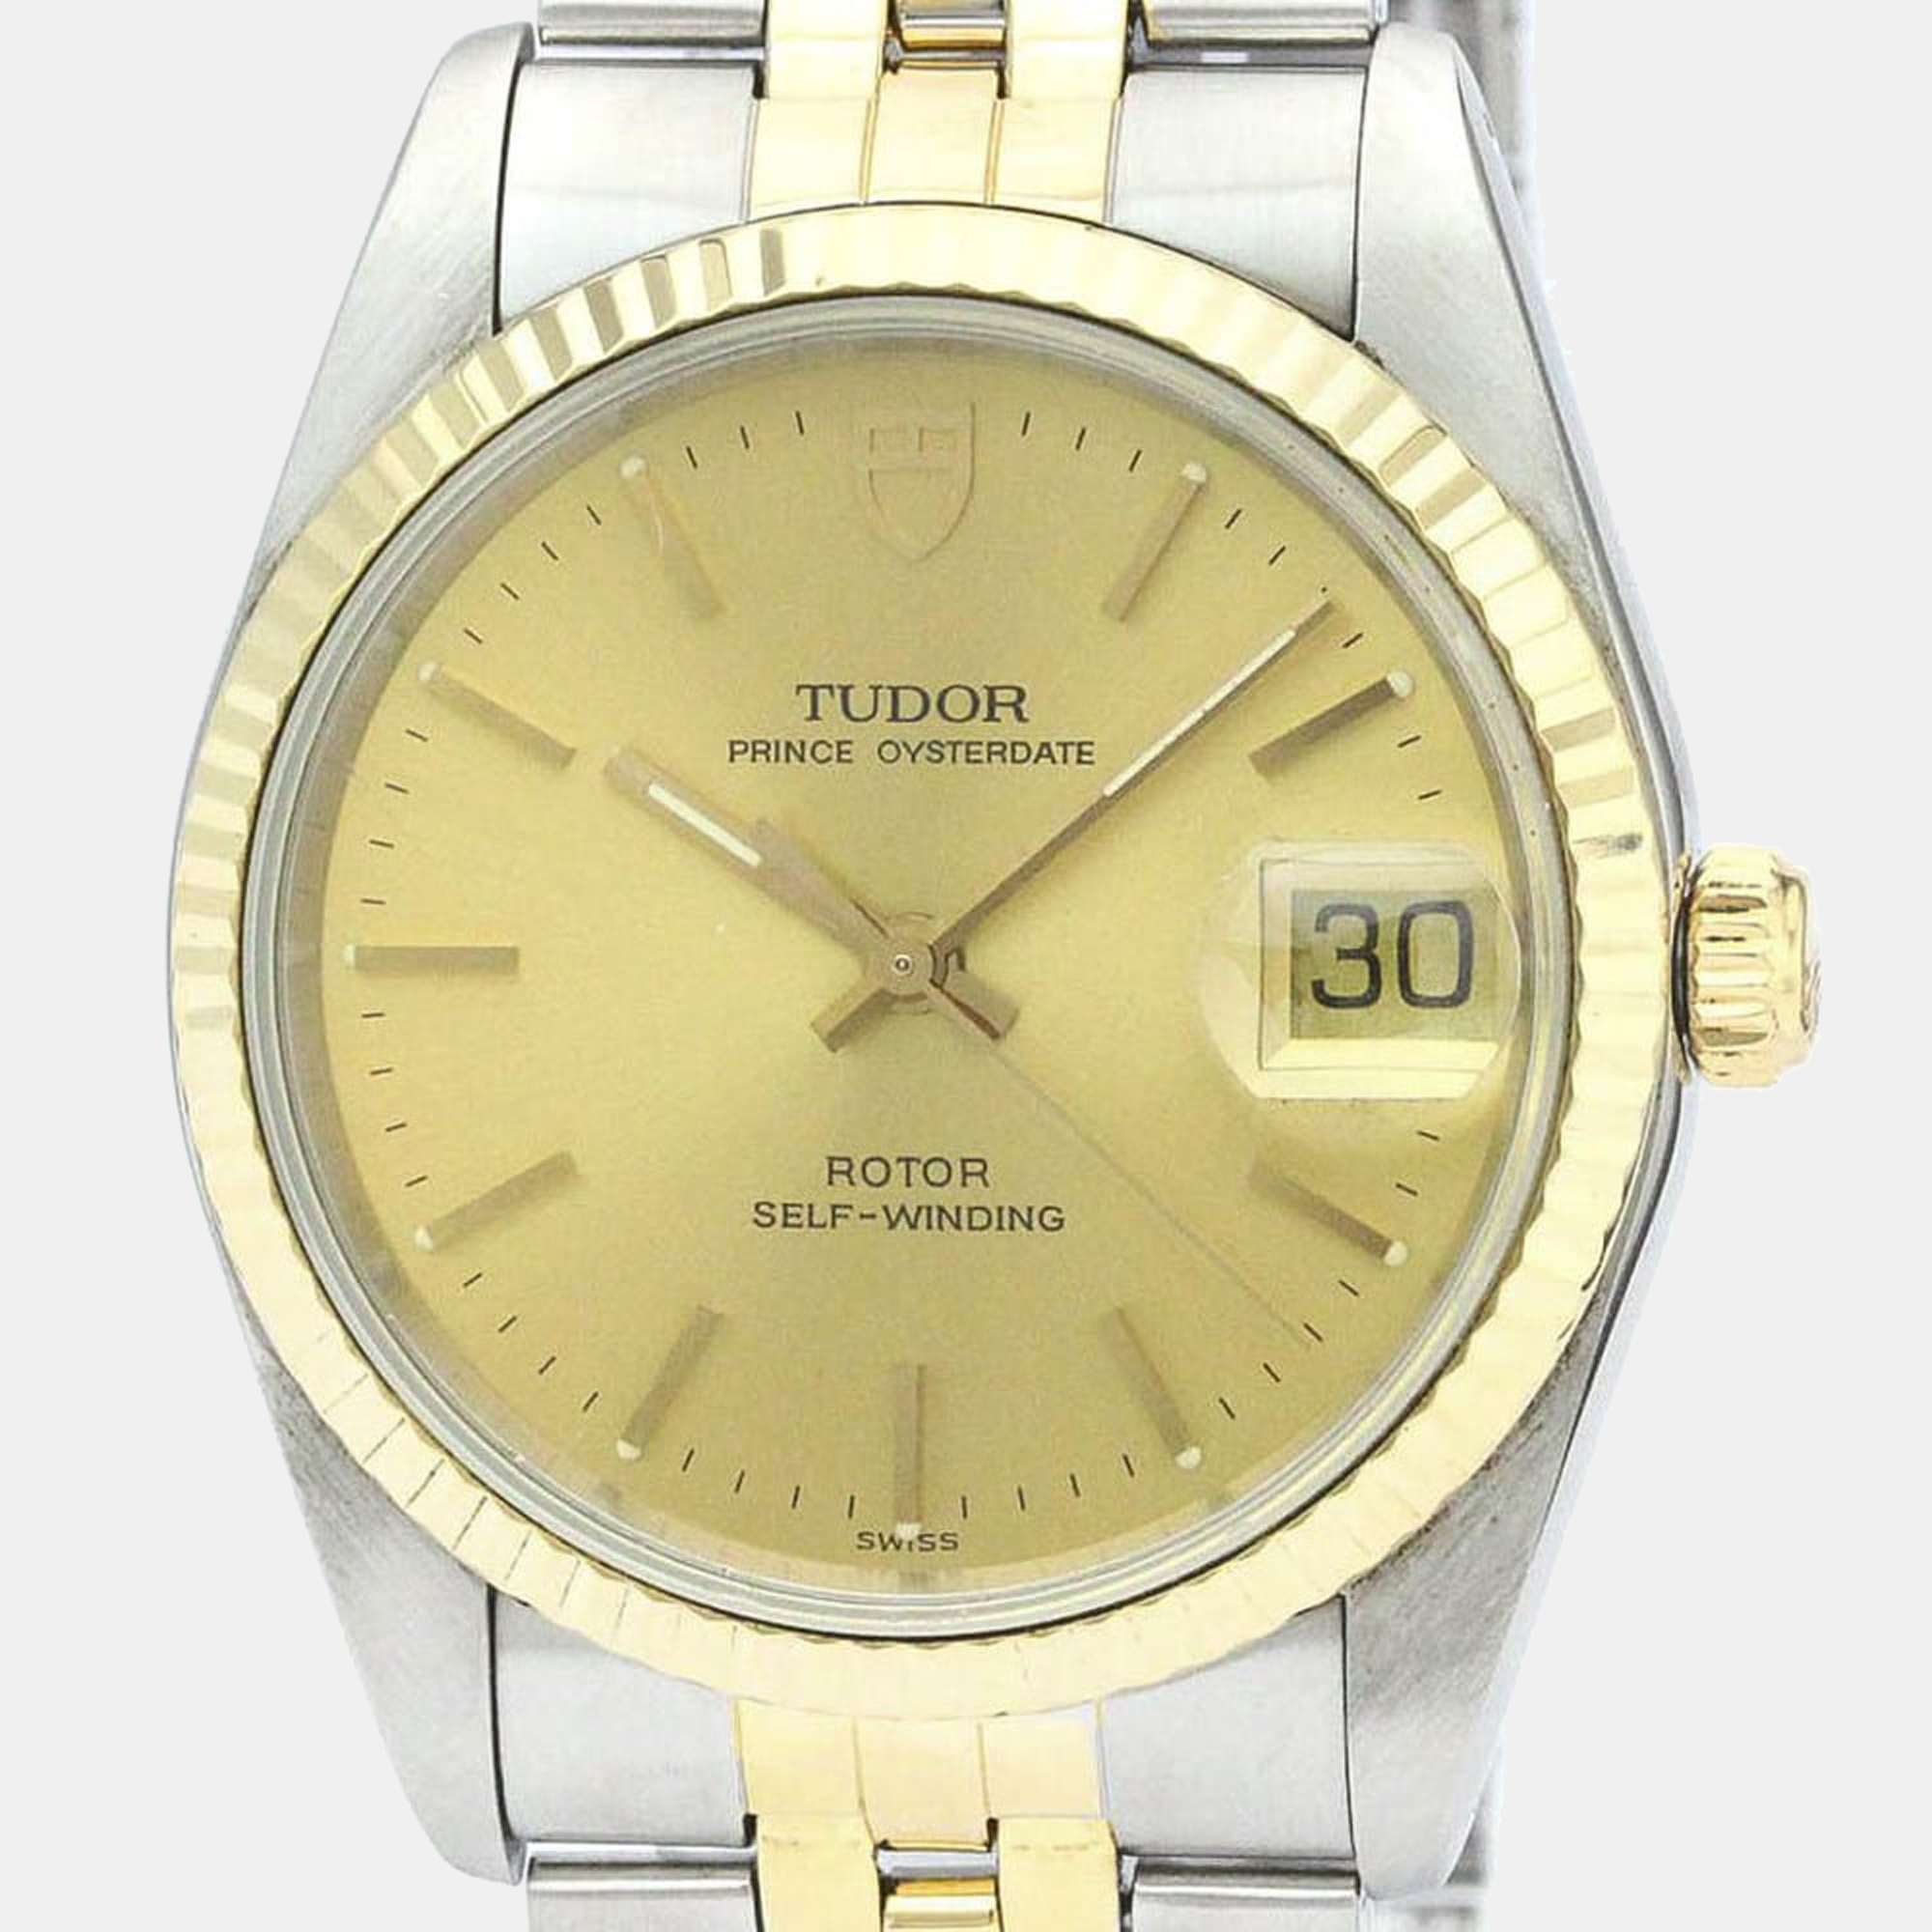 Tudor Champagne 18K Yellow Gold And Stainless Steel Prince Oysterdate 74033 Men's Wristwatch 34 Mm